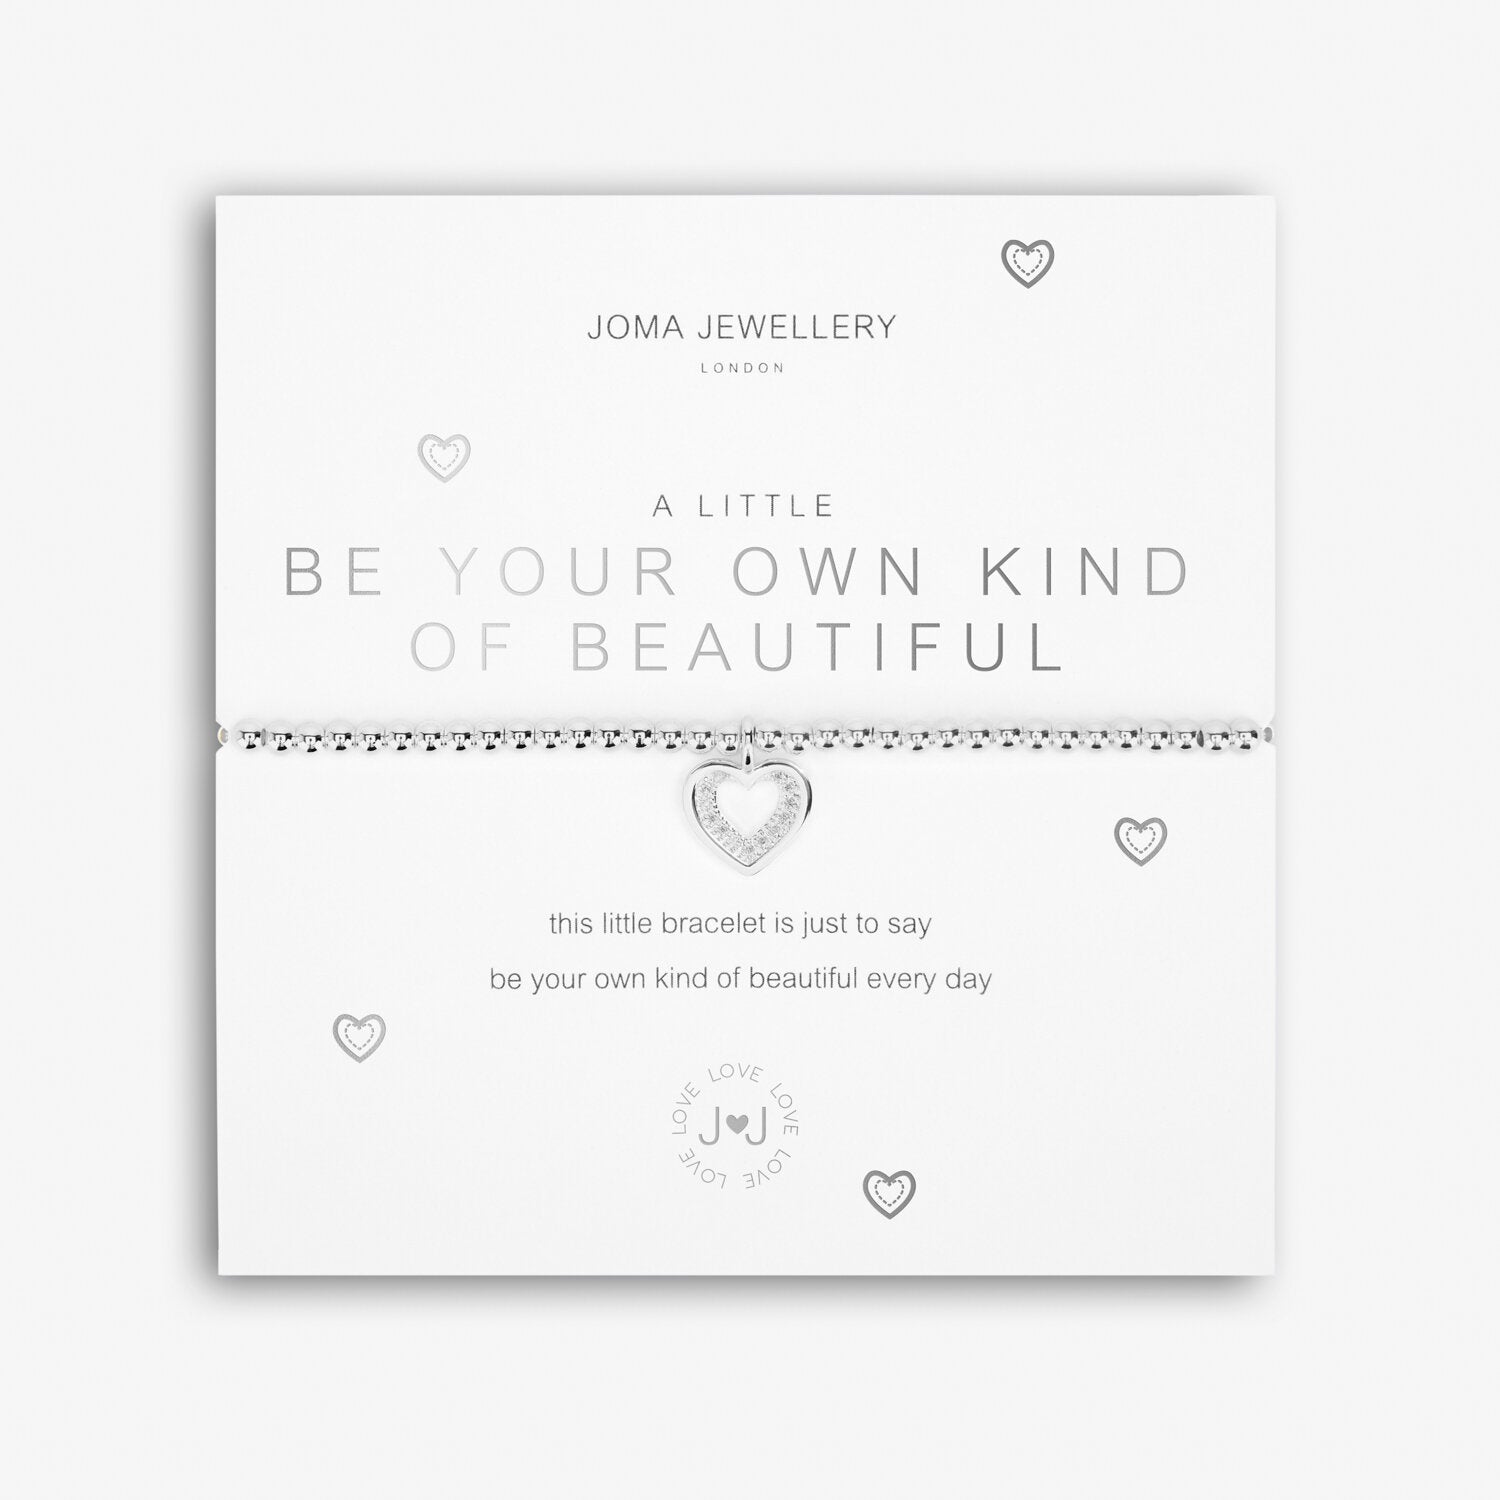 Joma Jewellery A Little 'Be Your Own Kind Of Beautiful' Bracelet | More Than Just A Gift